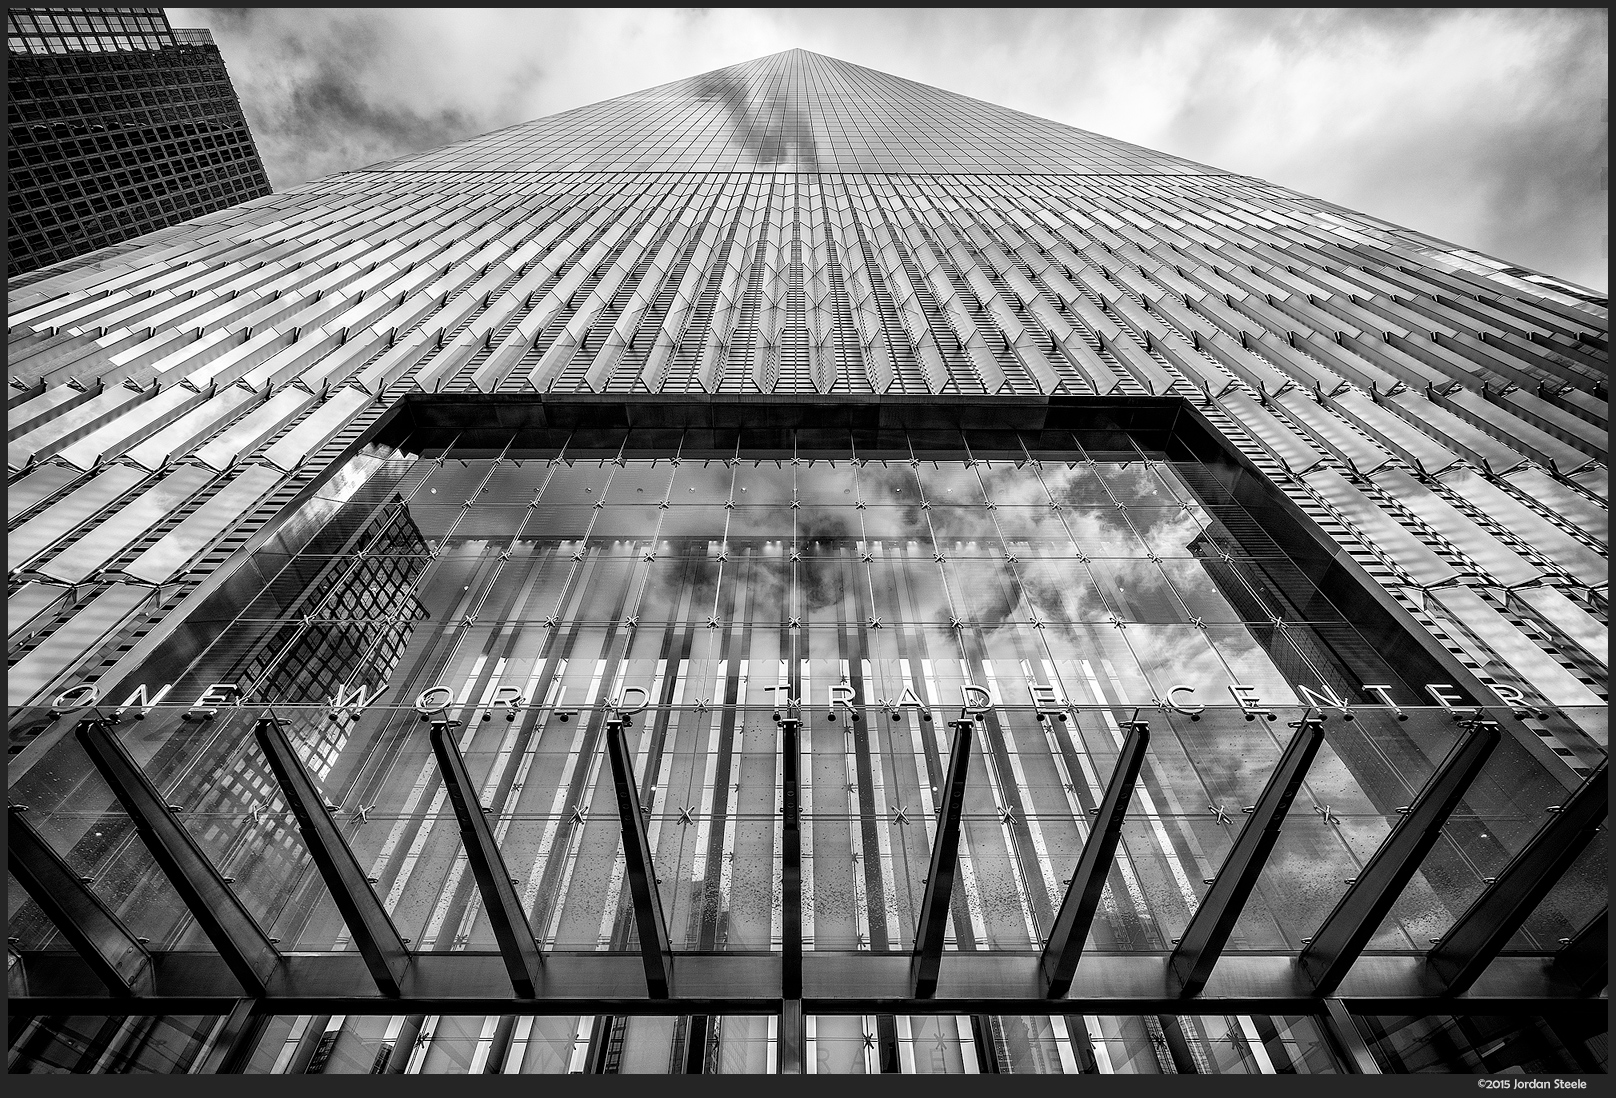 One World Trade Center - Sony A7 II with Zeiss FE 16-35mm f/4 @ 16mm, 